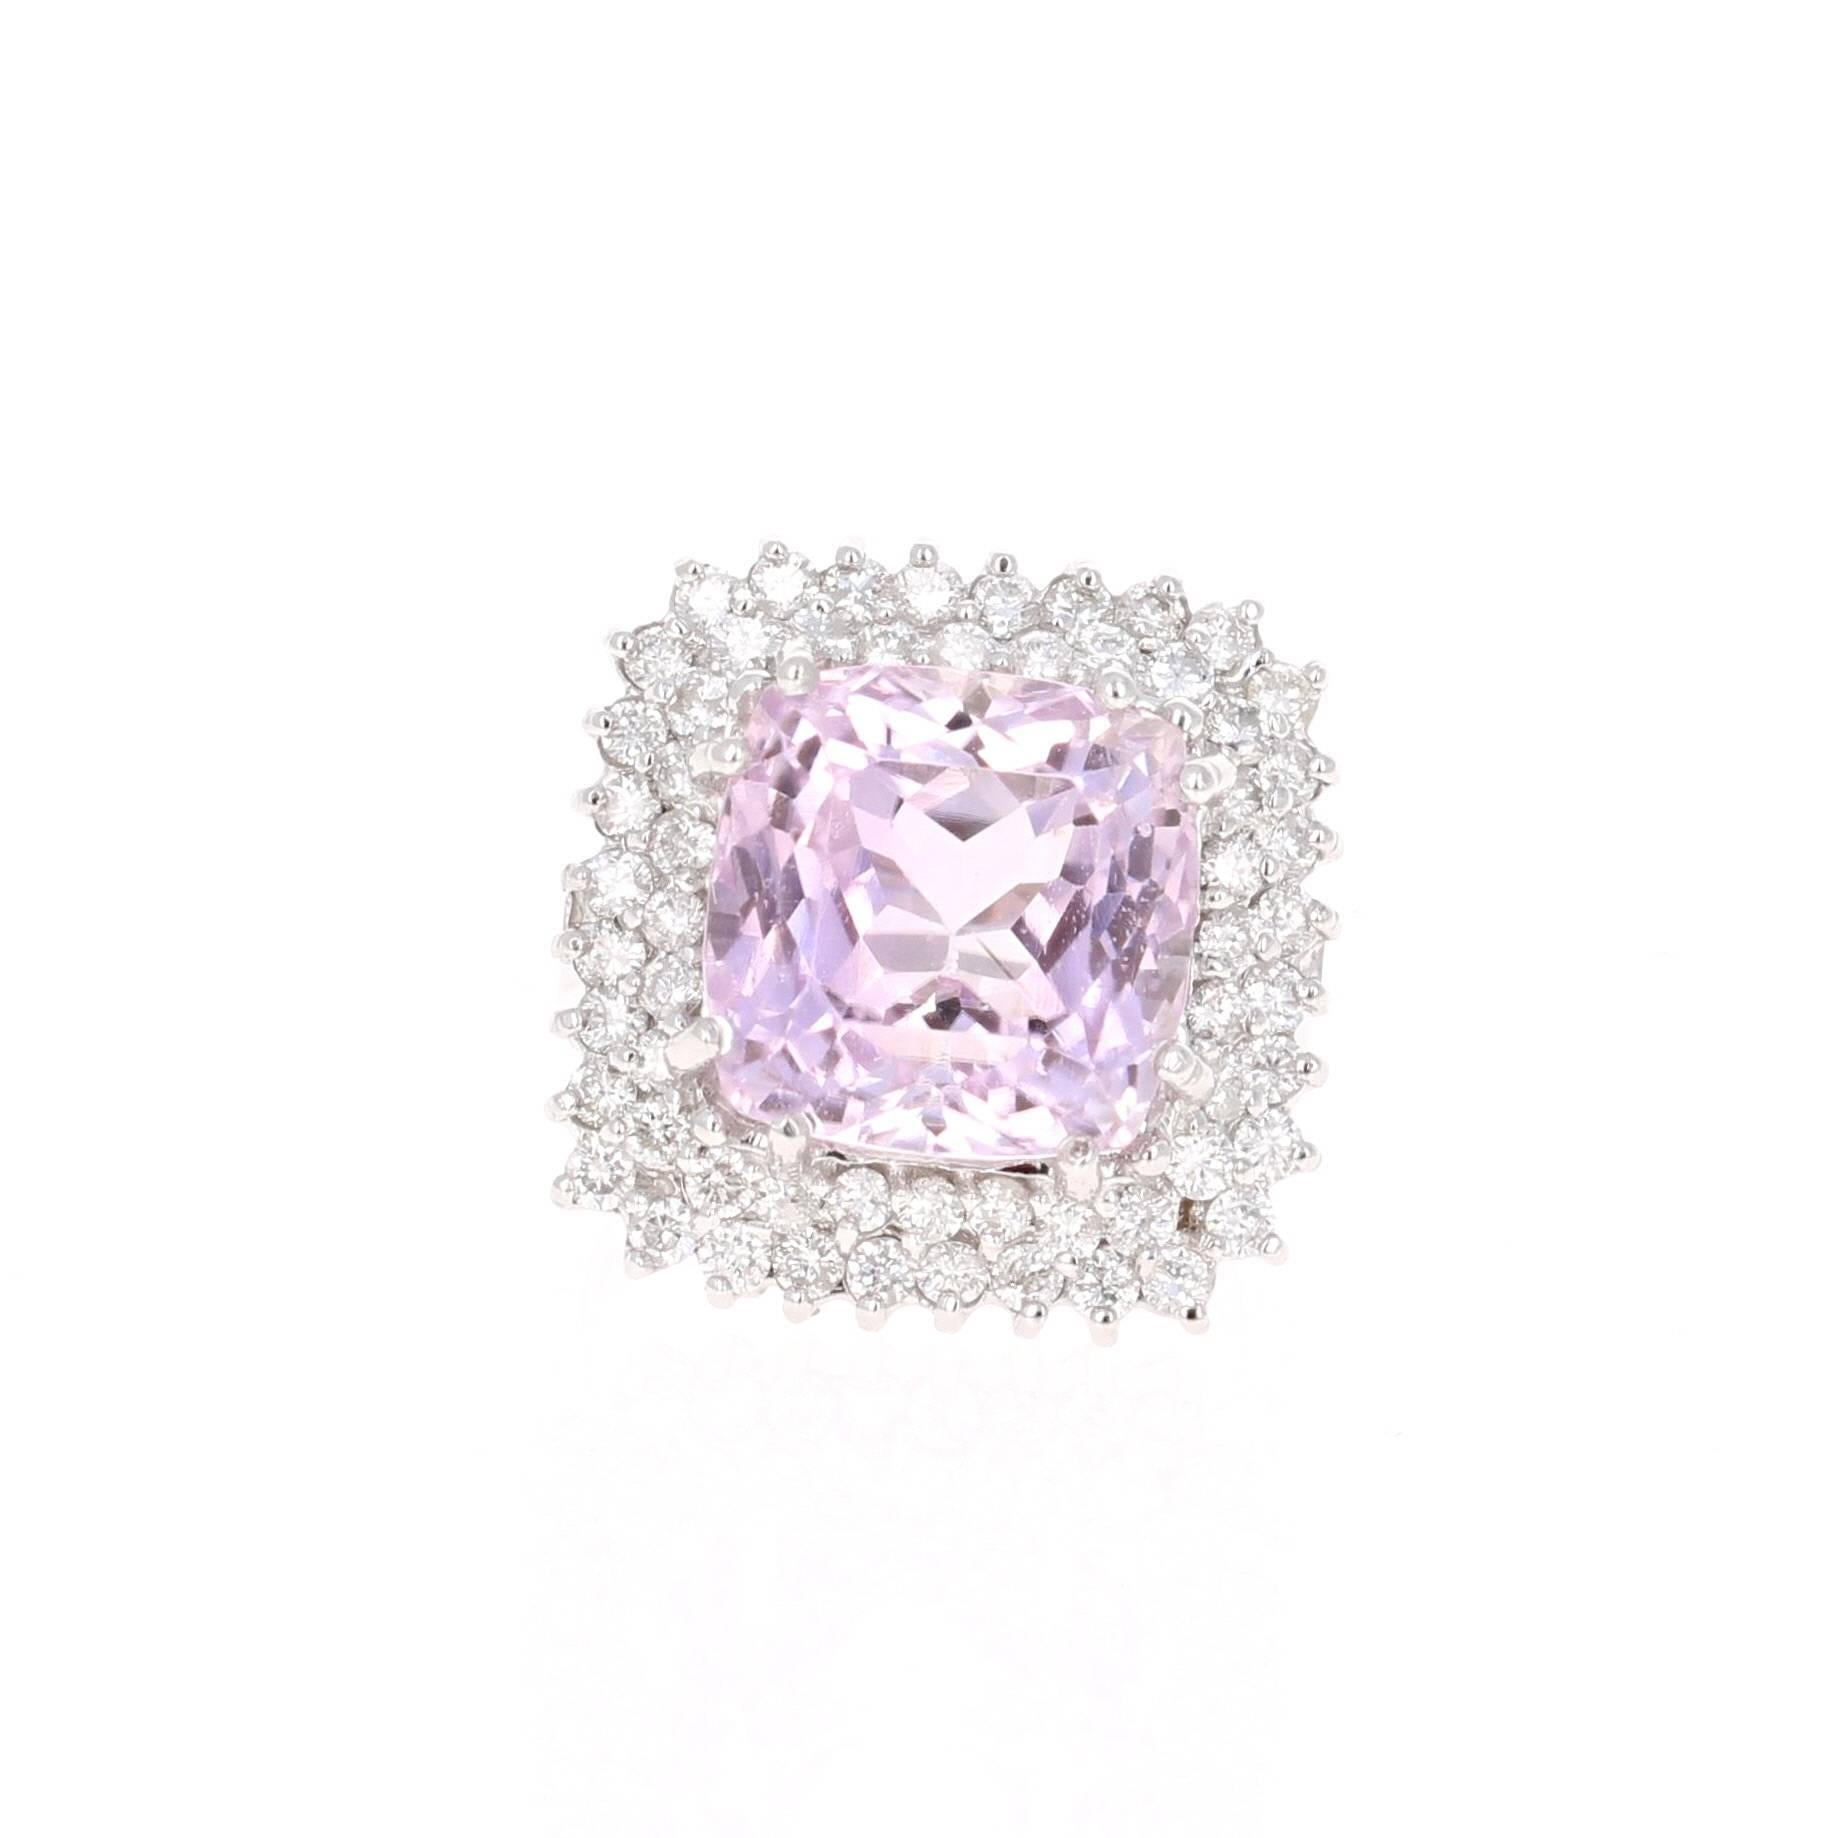 This stunning show stopper has a huge 14.17 carat Kunzite that is set in the center of the ring, it is surrounded by 2 rows of 60 Round Cut Diamonds that weigh 1.45 carats (Clarity: SI2, Color: F). The total carat weight of the ring is 15.62 carats.